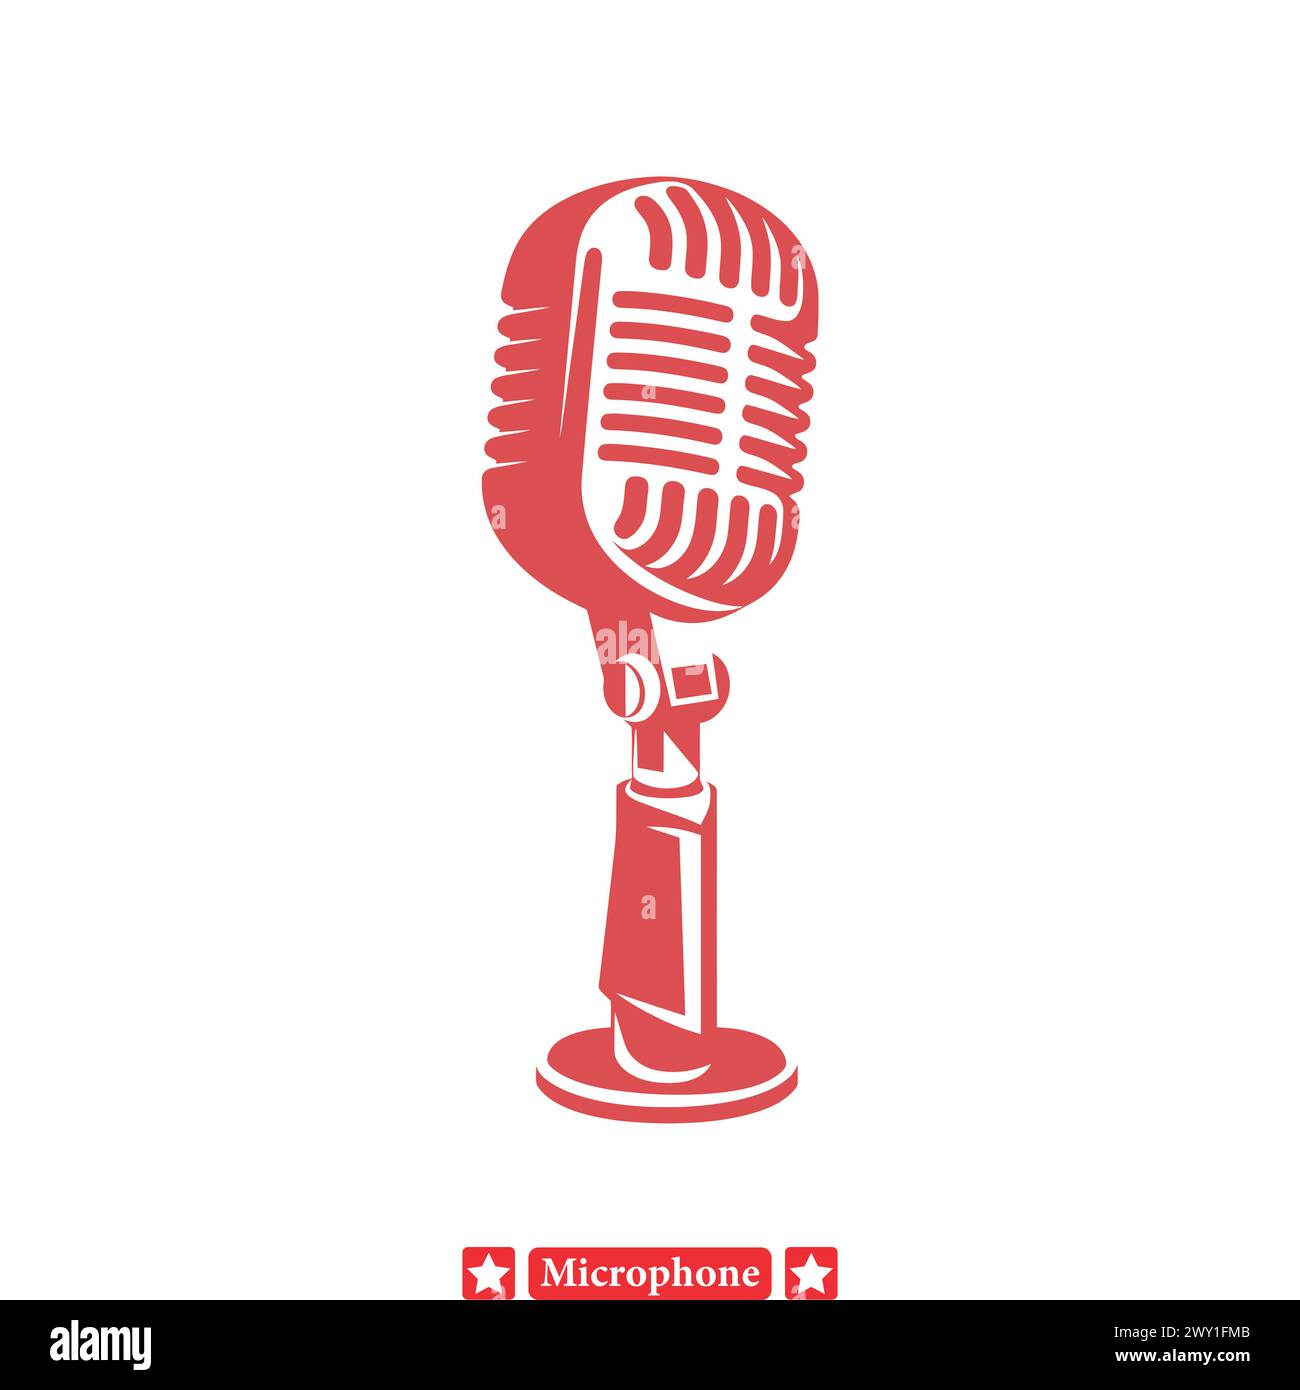 Tech Gadgets Galore  Stylish Microphone Silhouette Designs for Technology and Gadgets Enthusiasts Stock Vector